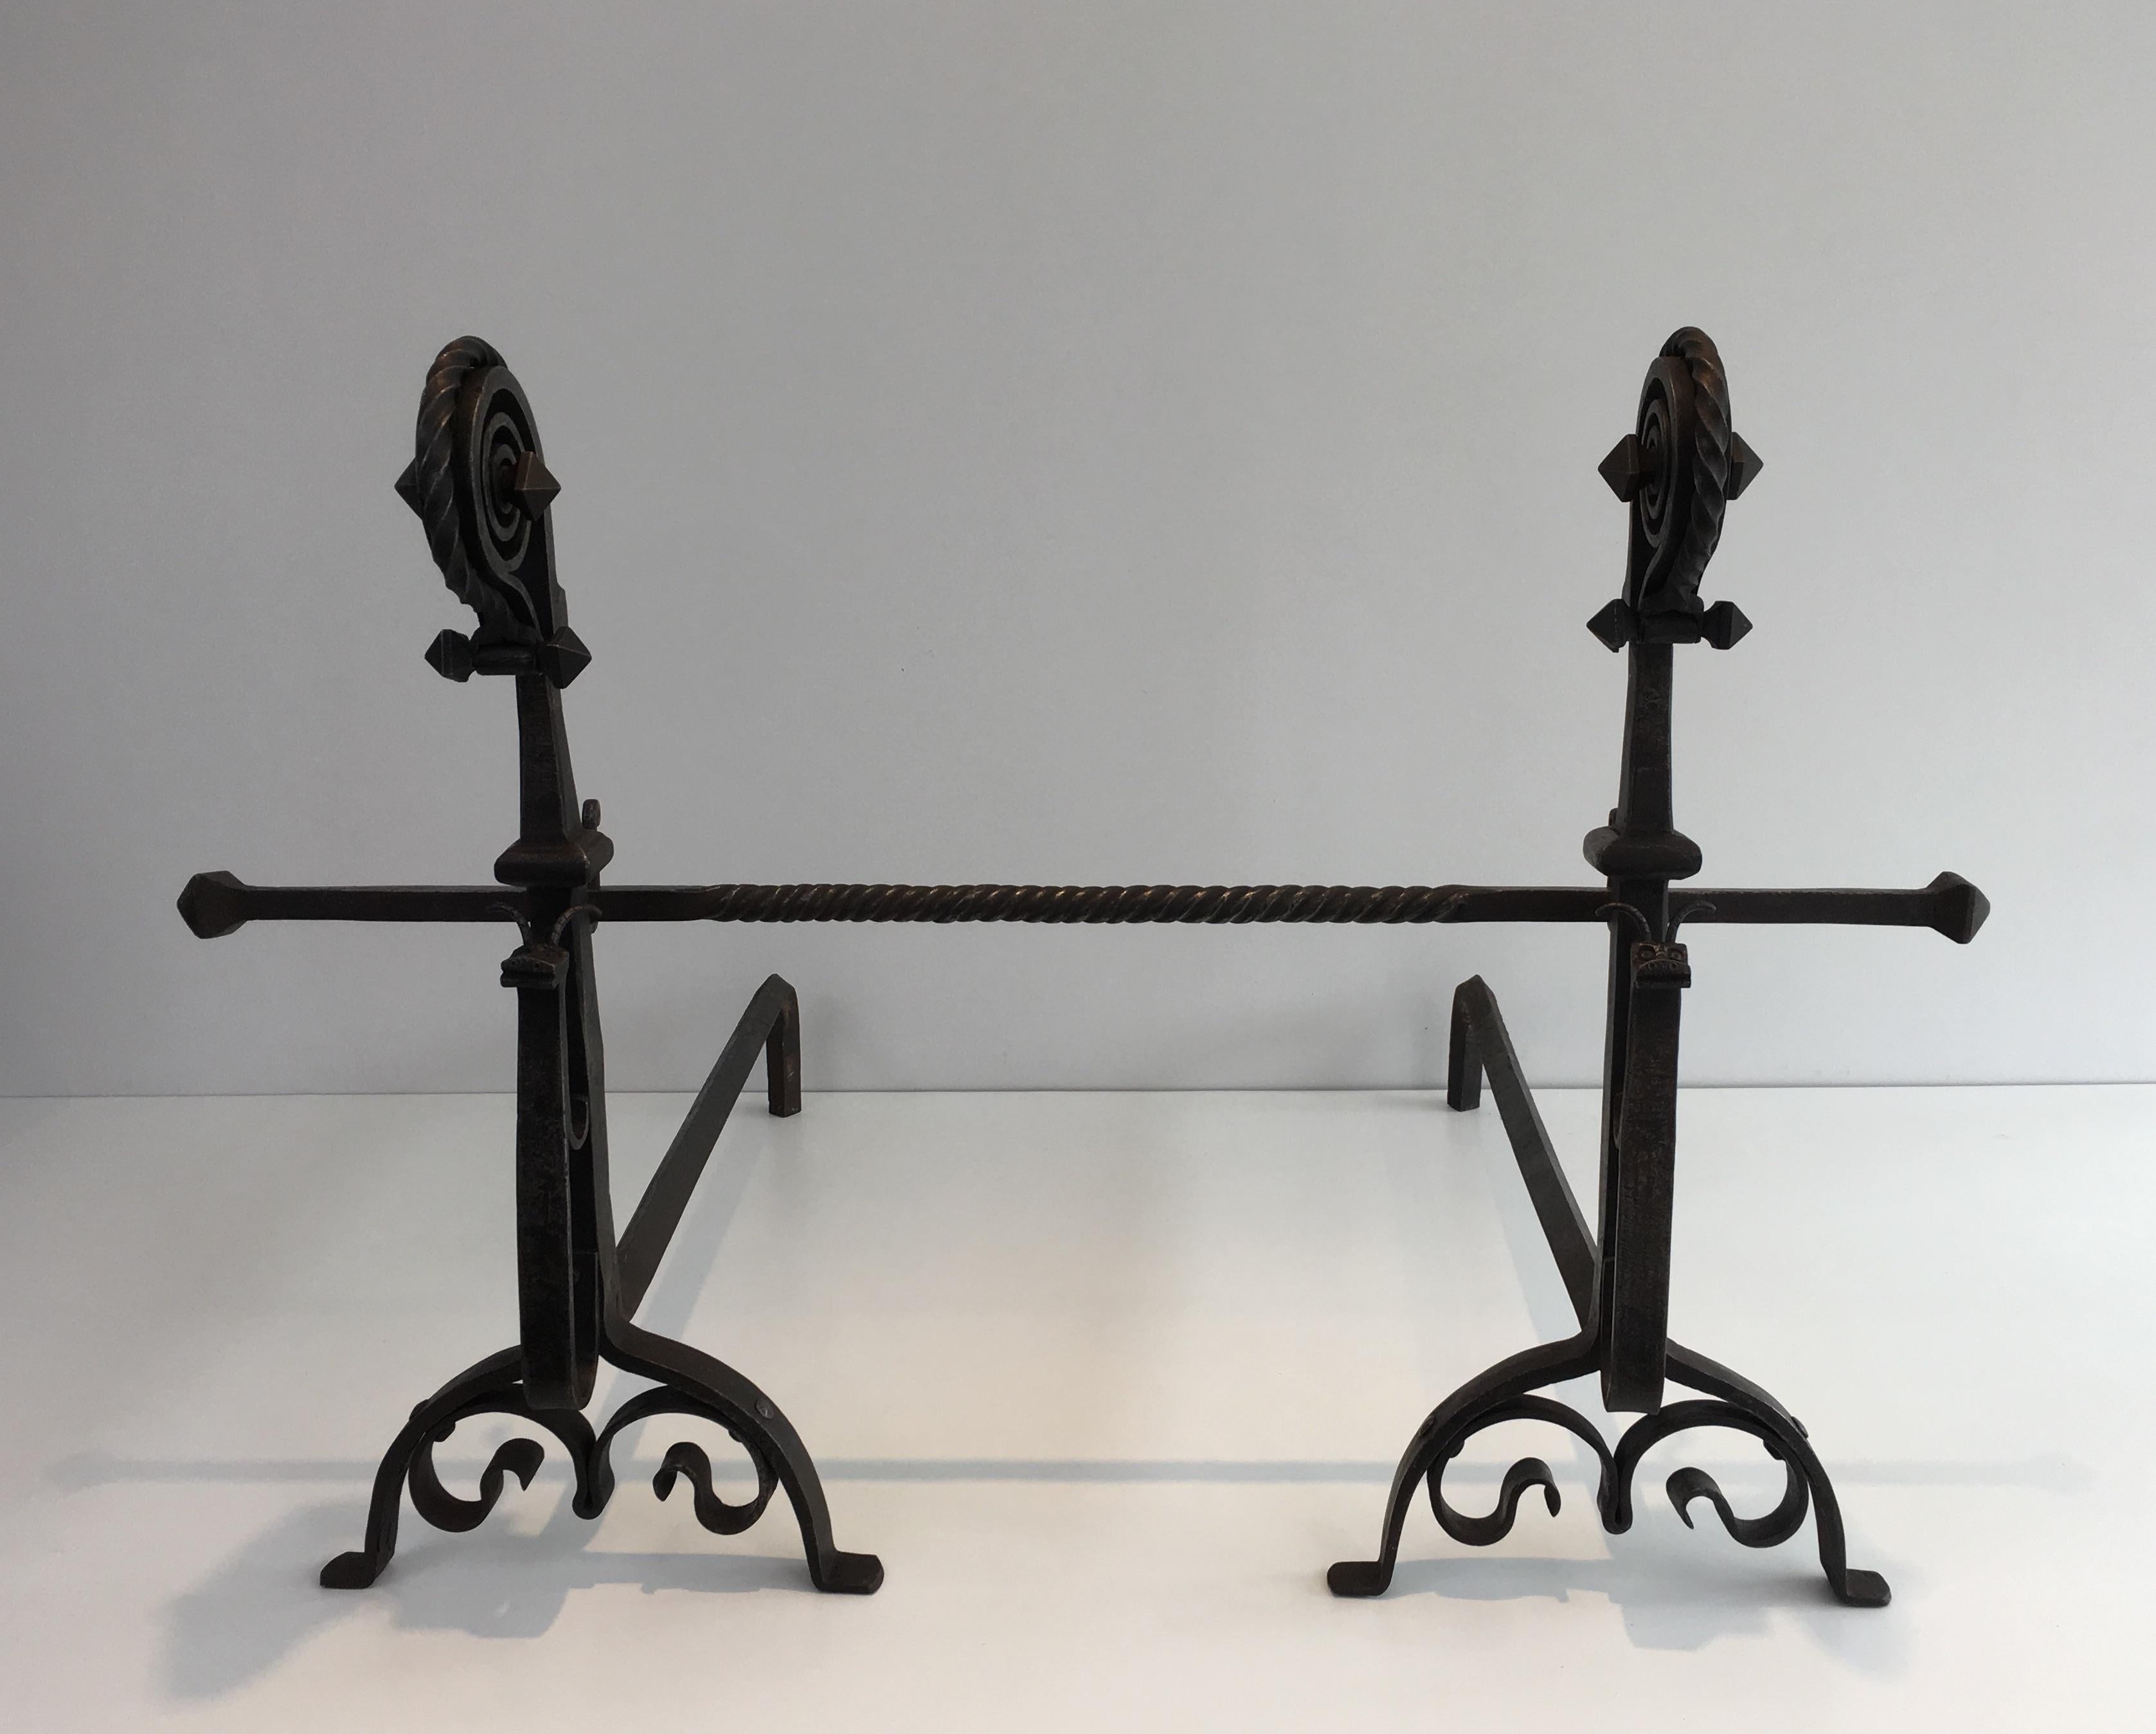 This exceptional pair of andirons is made of a hammered wrought iron. This beautiful work represents 